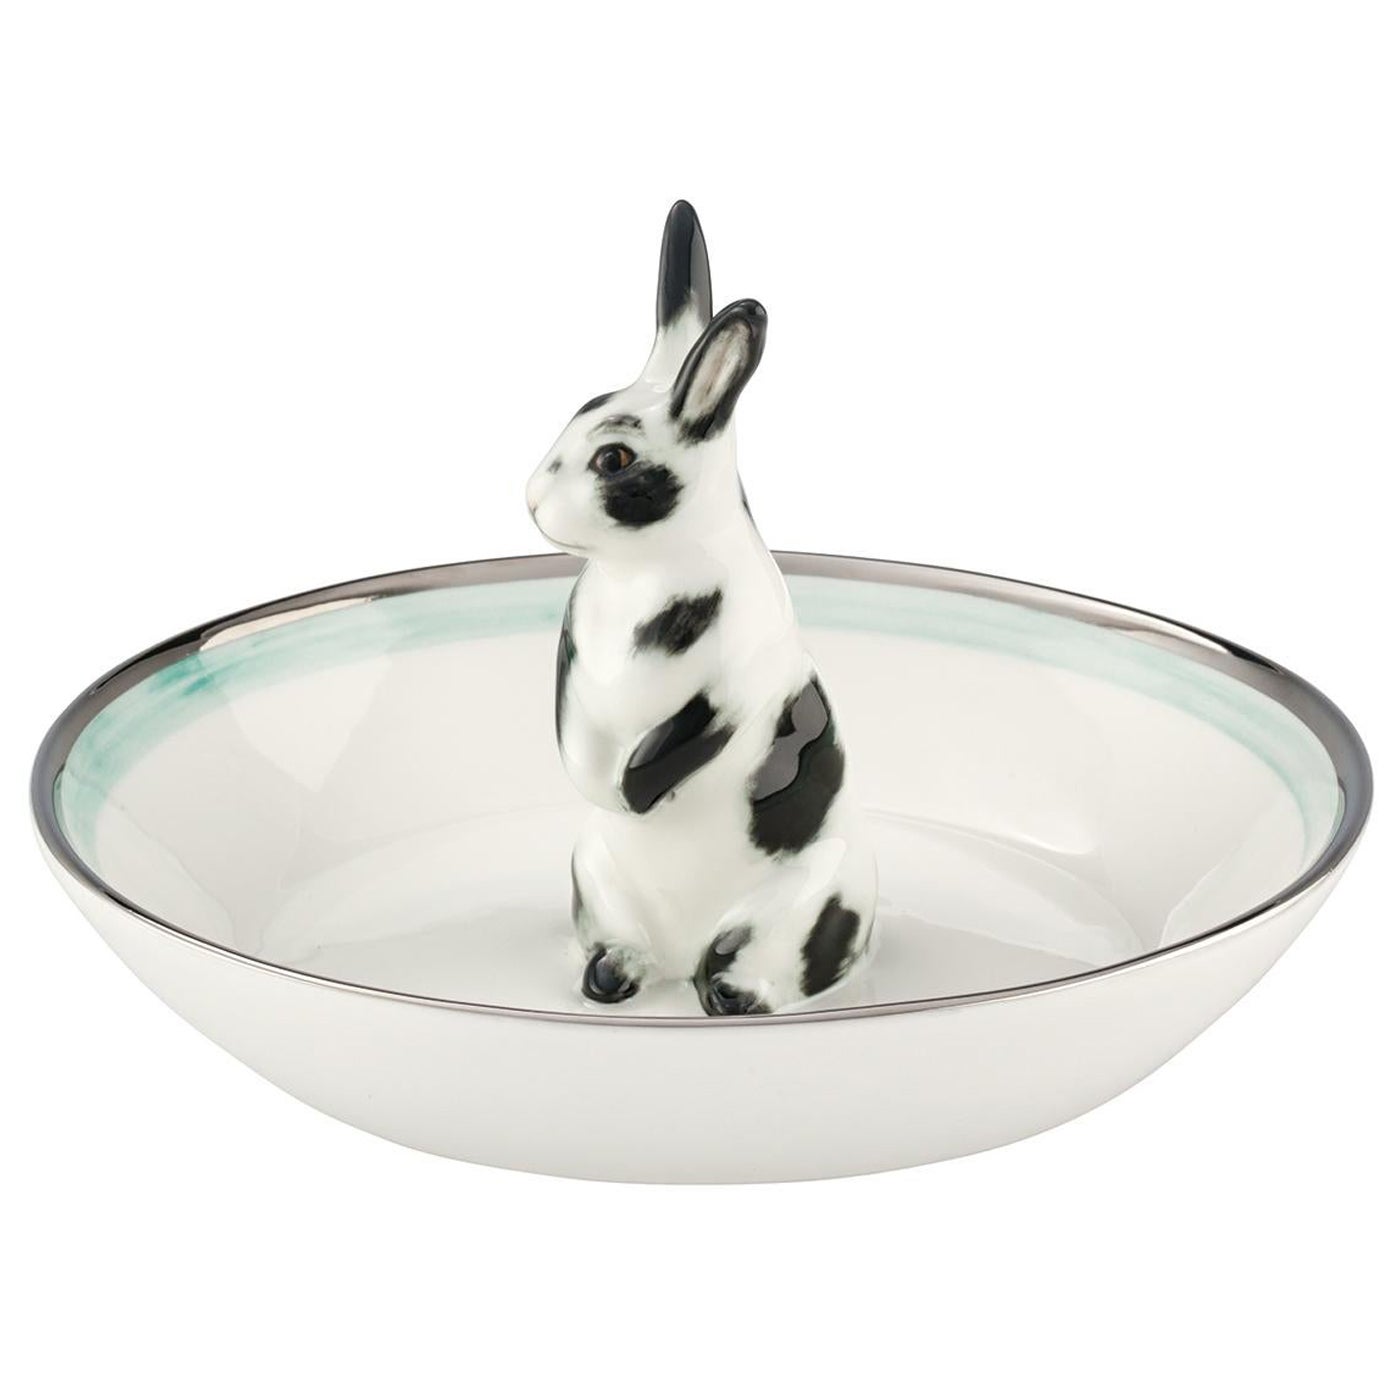 Country Style Easter Porcelain Bowl with Hare Figure Sofina Boutique Kitzbuehel